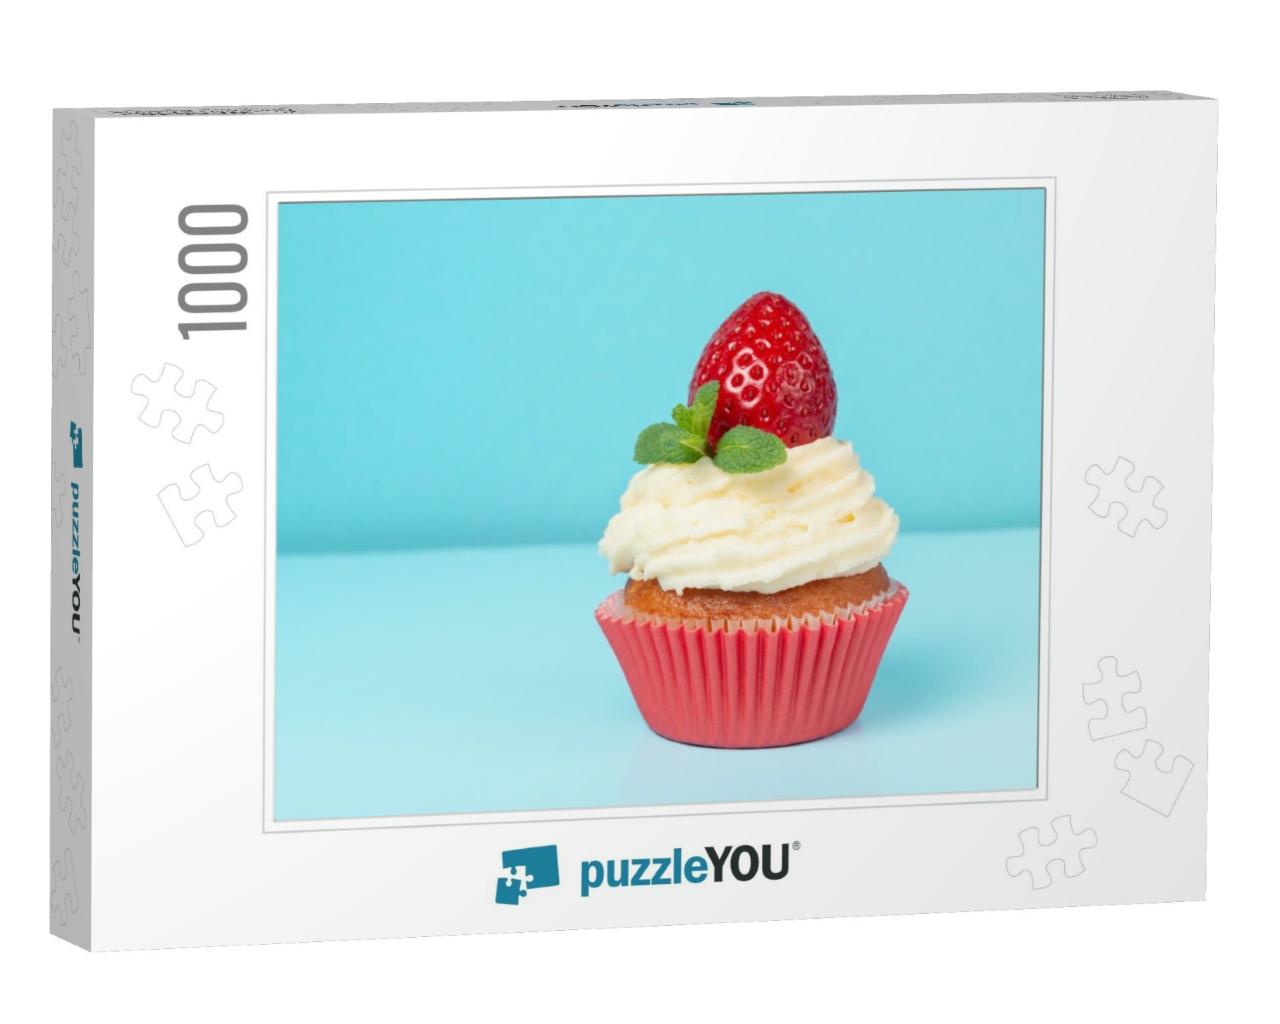 Cupcake with Whipped Cream Decorated Strawberry & Mint on... Jigsaw Puzzle with 1000 pieces